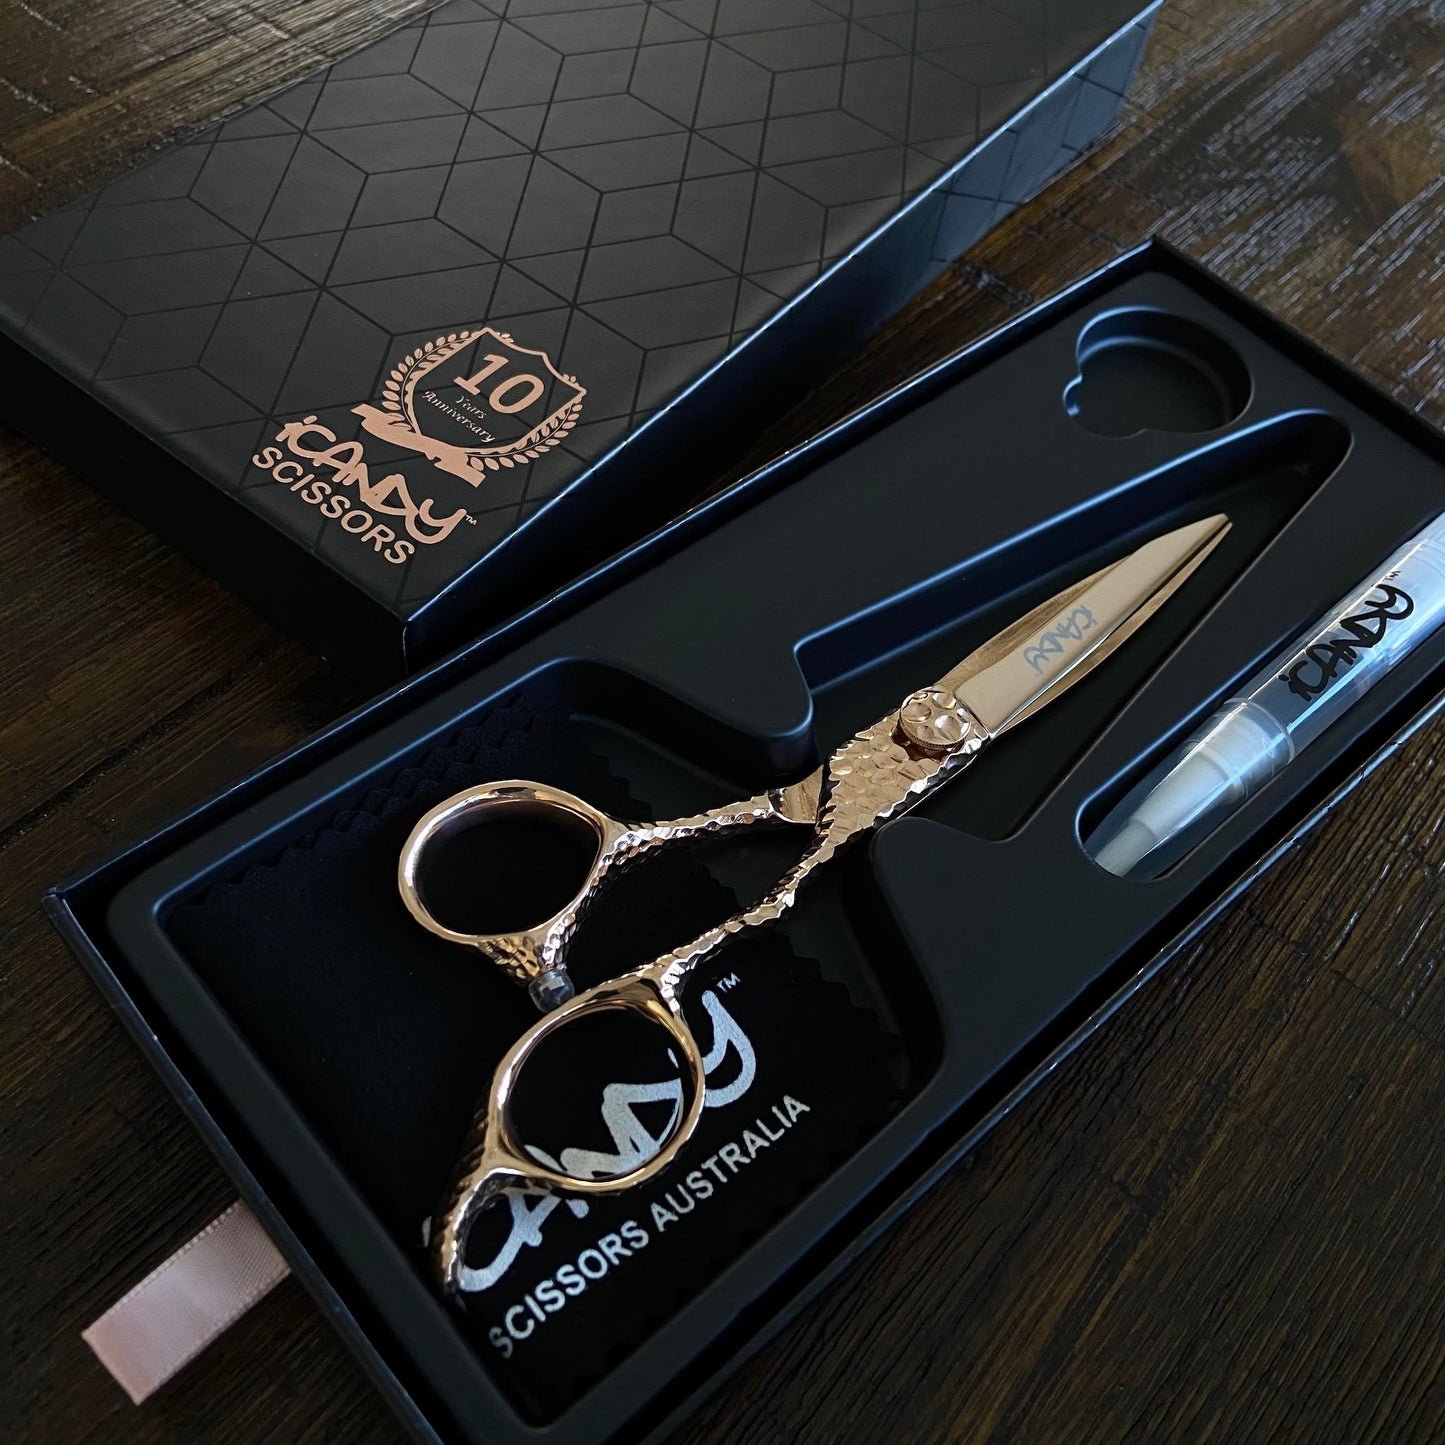 iCandy Sword Pro Rose Gold VG10 6.1" 10 Years Anniversary Edition Scissors Open Box